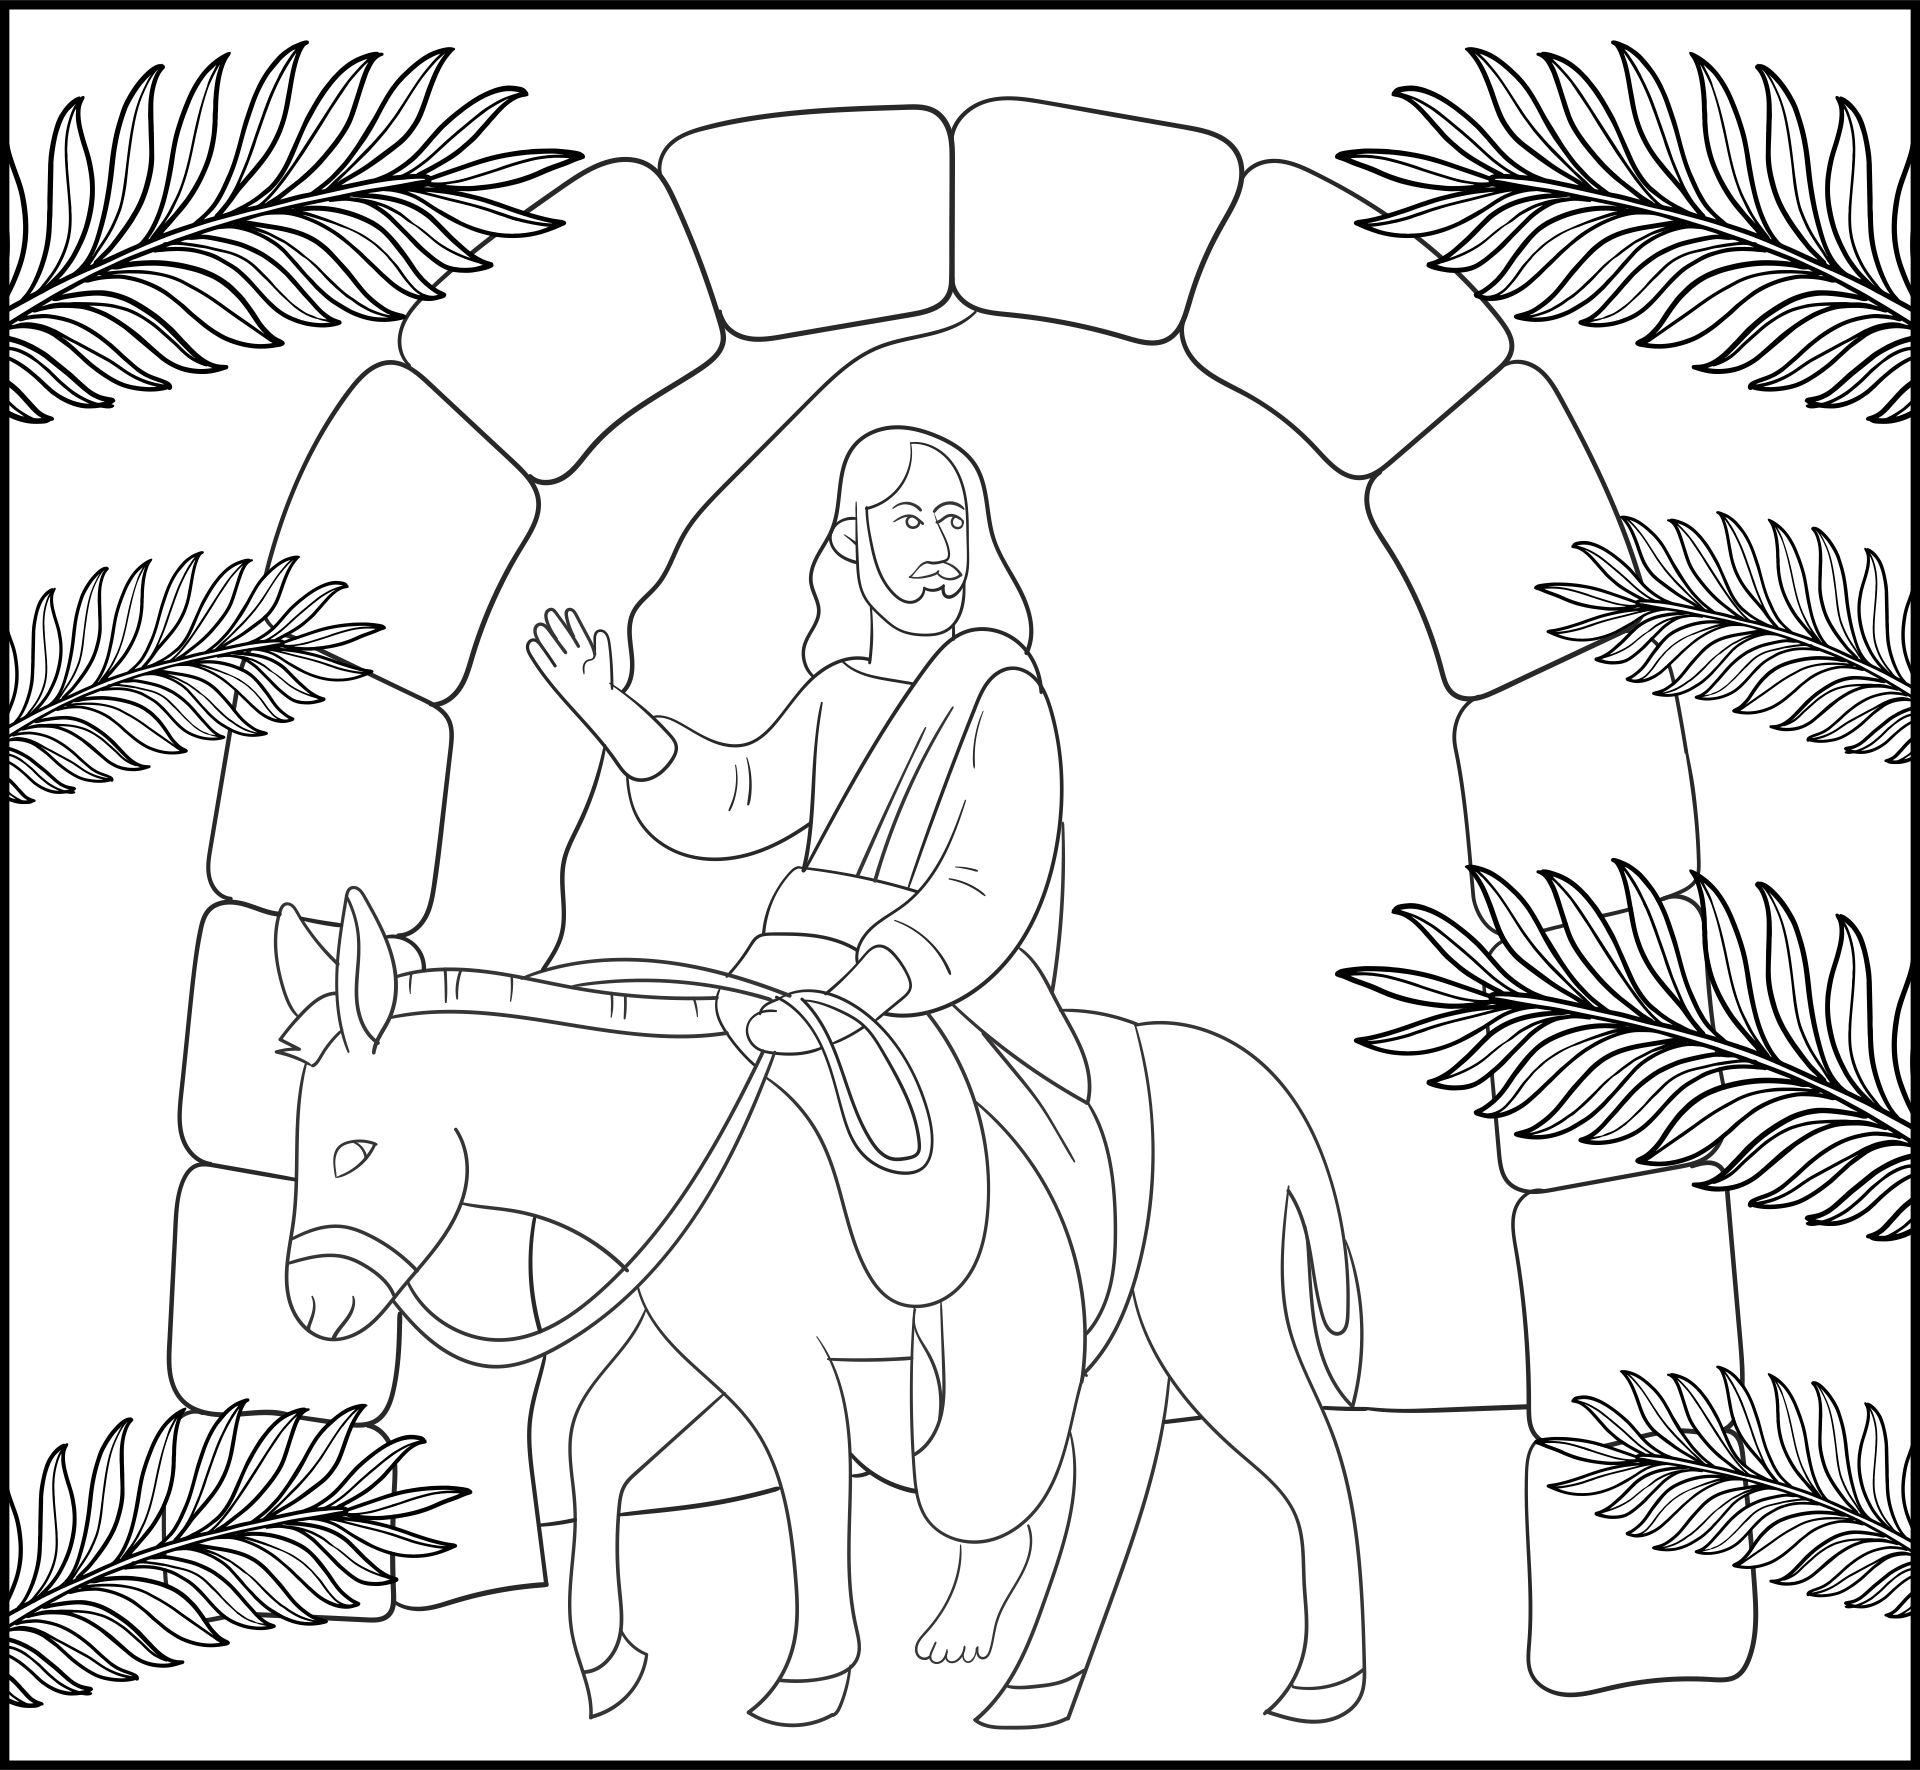 Triumphal Entry Sunday School Coloring Pages